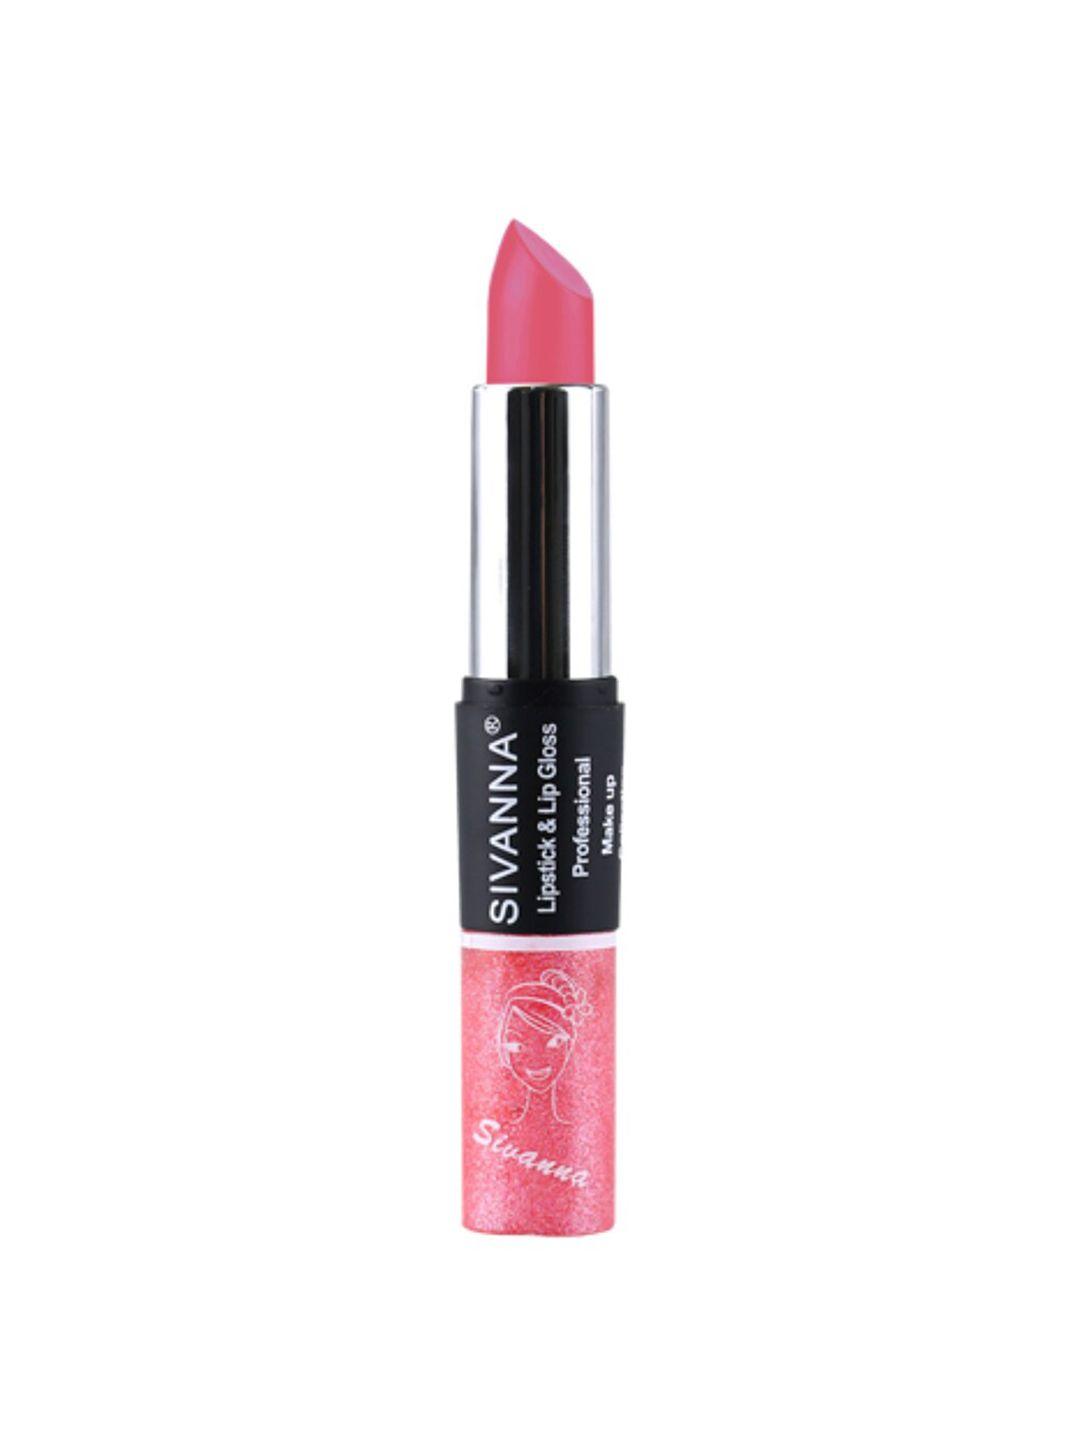 sivanna colors professional makeup collection 2 in 1 lipstick & lip gloss - dk061 14